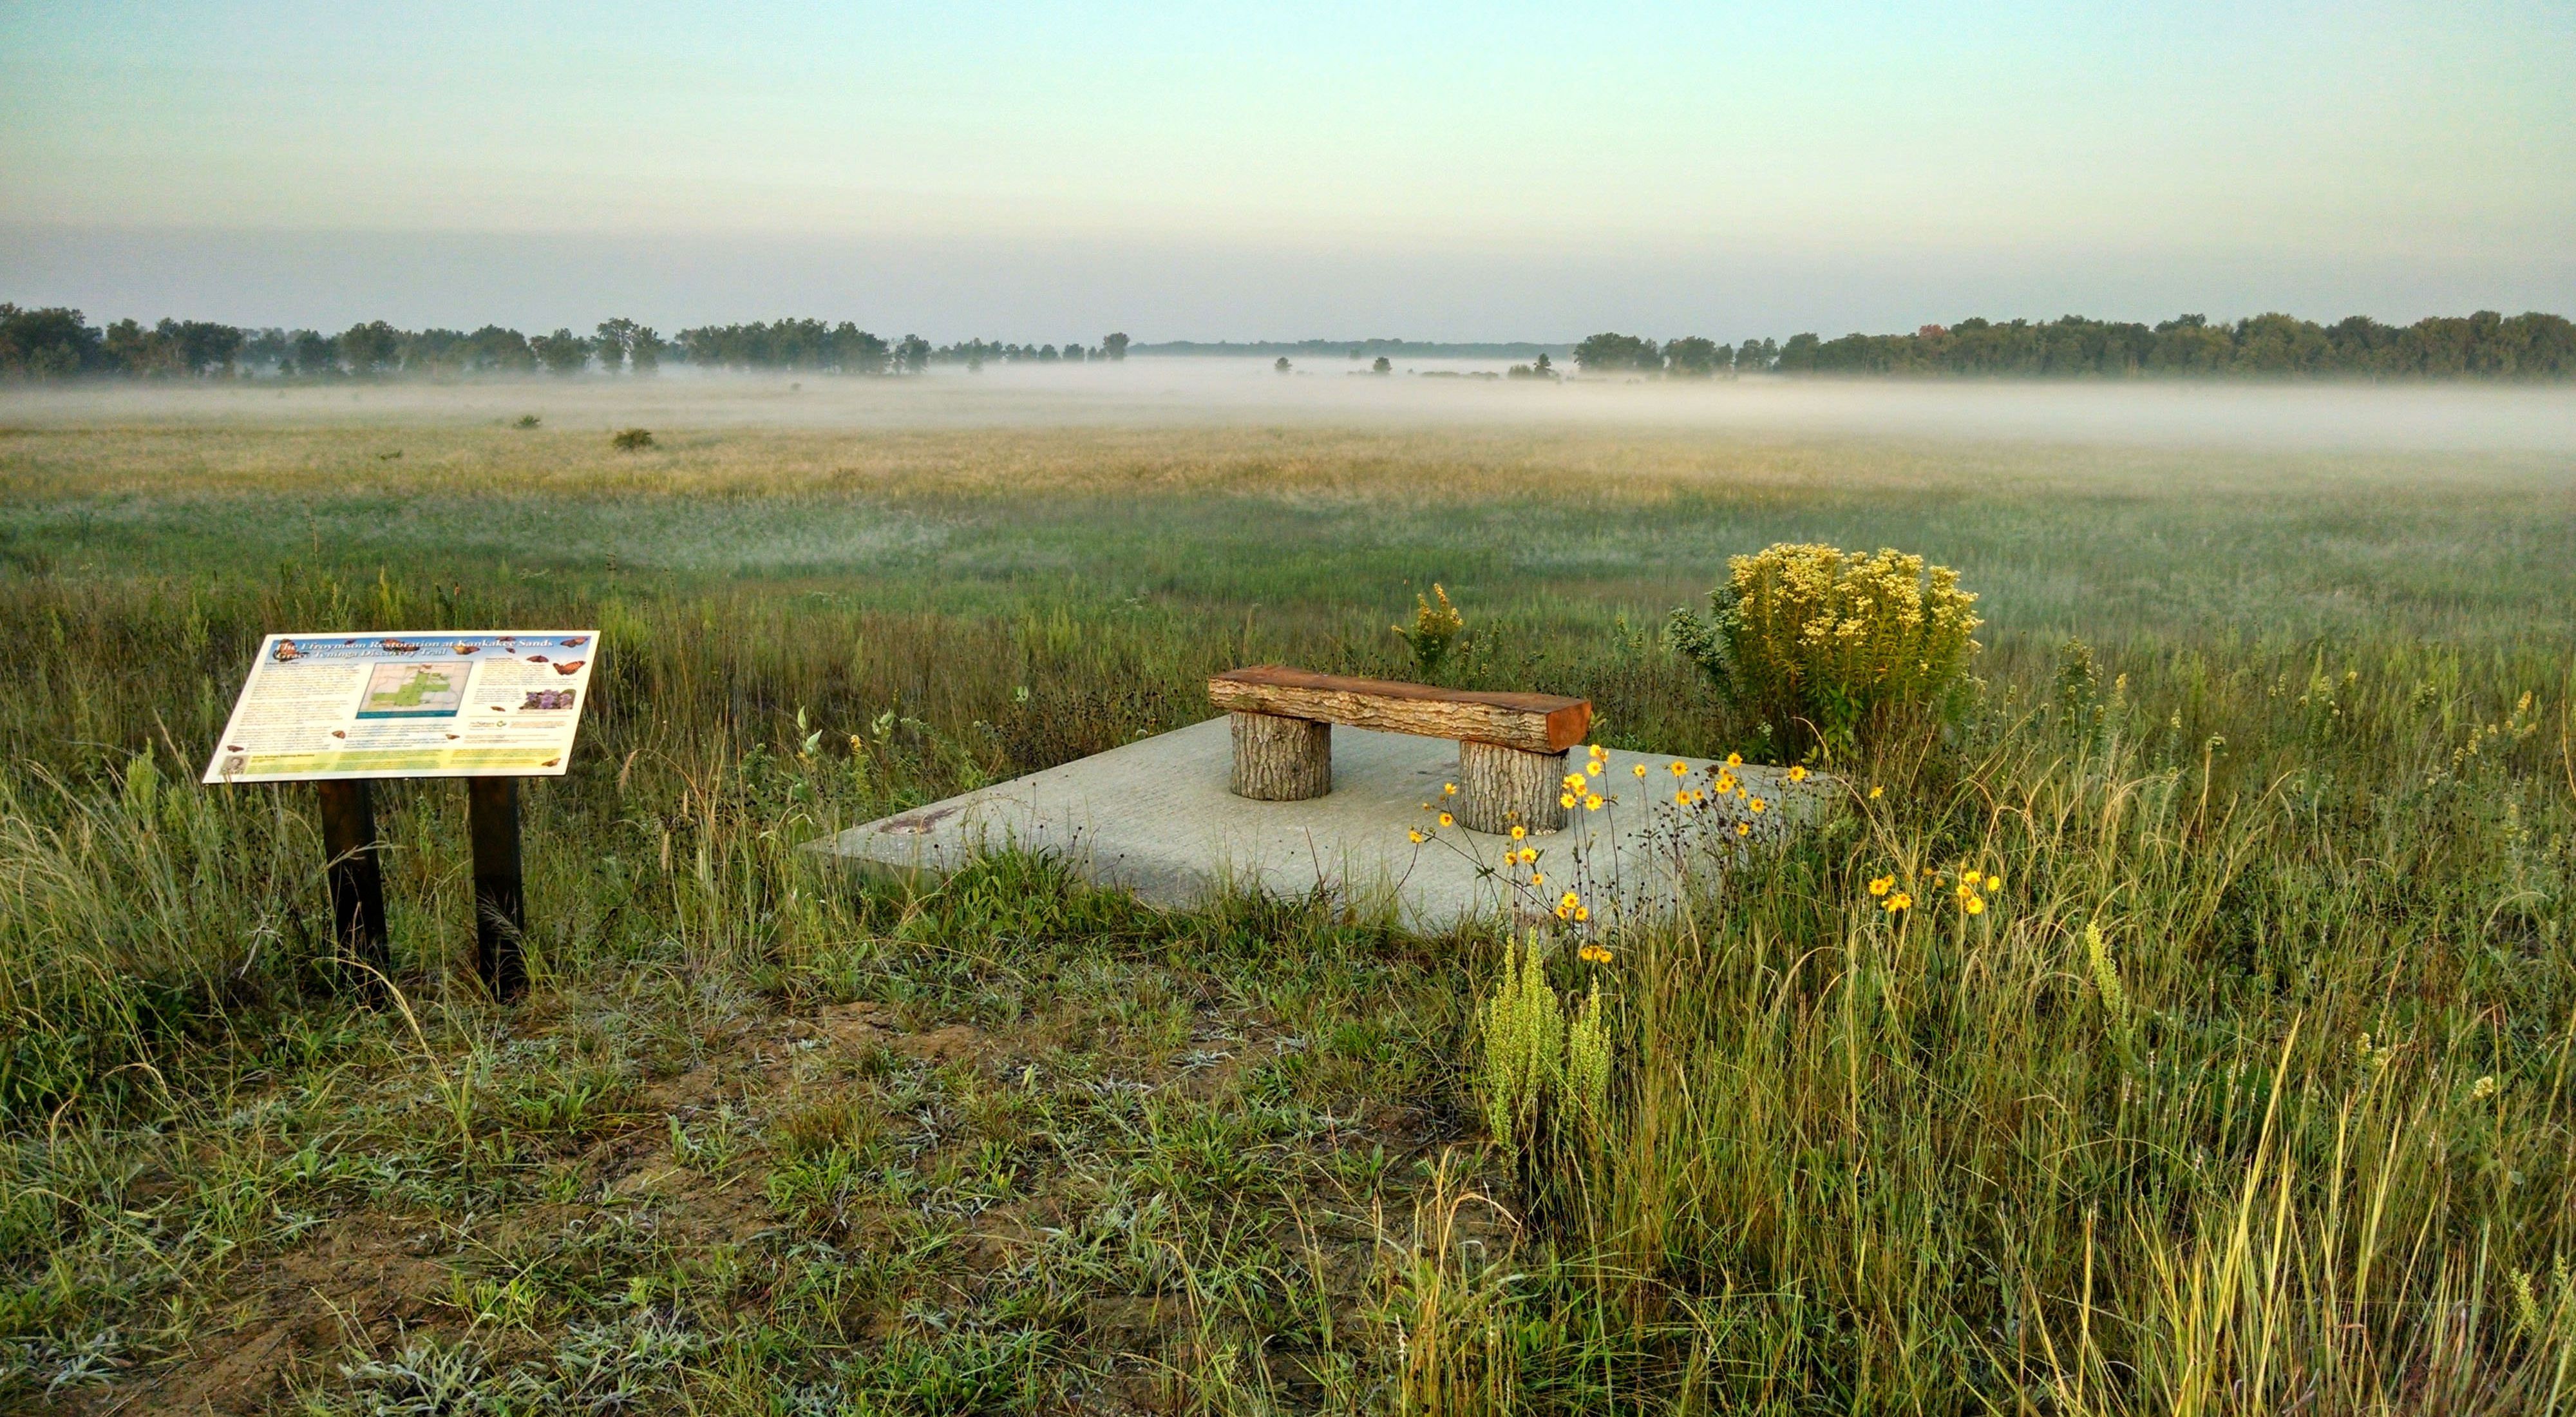 Bench on concrete slab next to interpretive sign on a misty morning on the prairie.